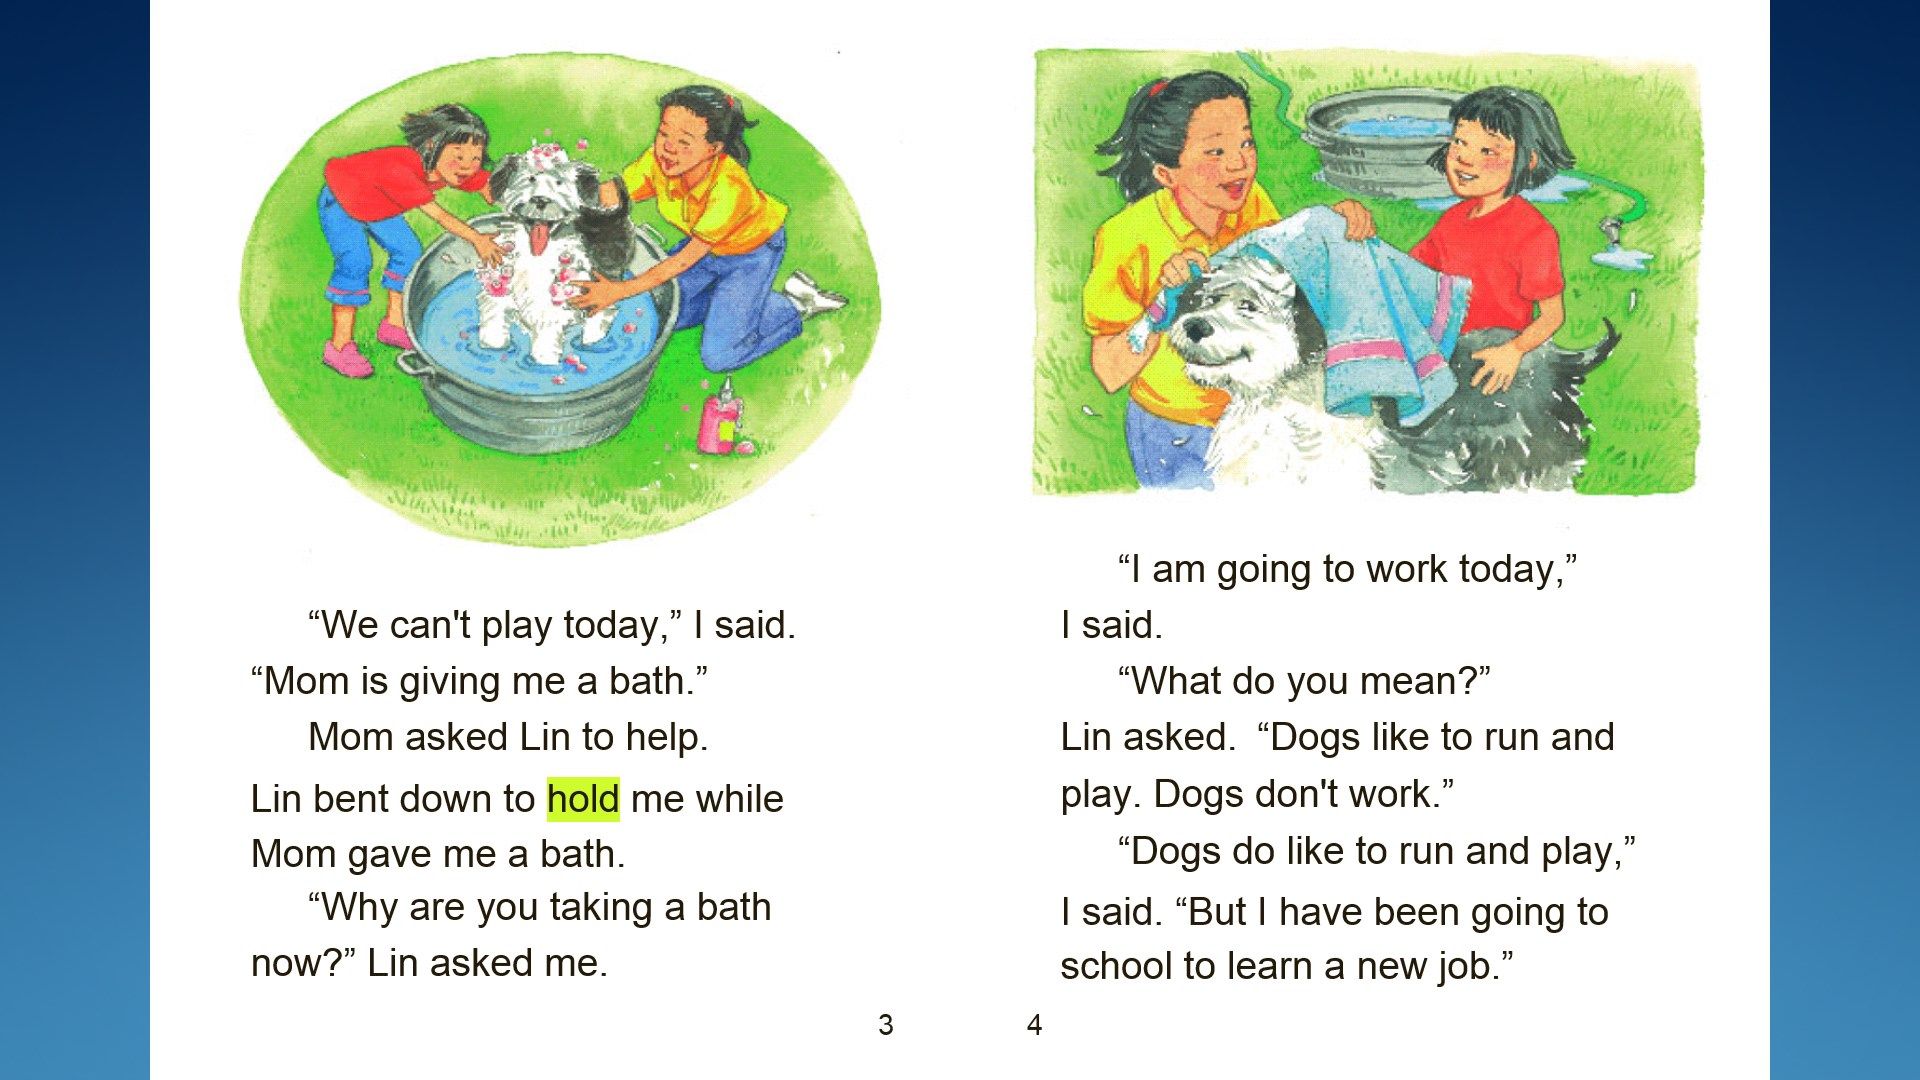 Sample page from a book.